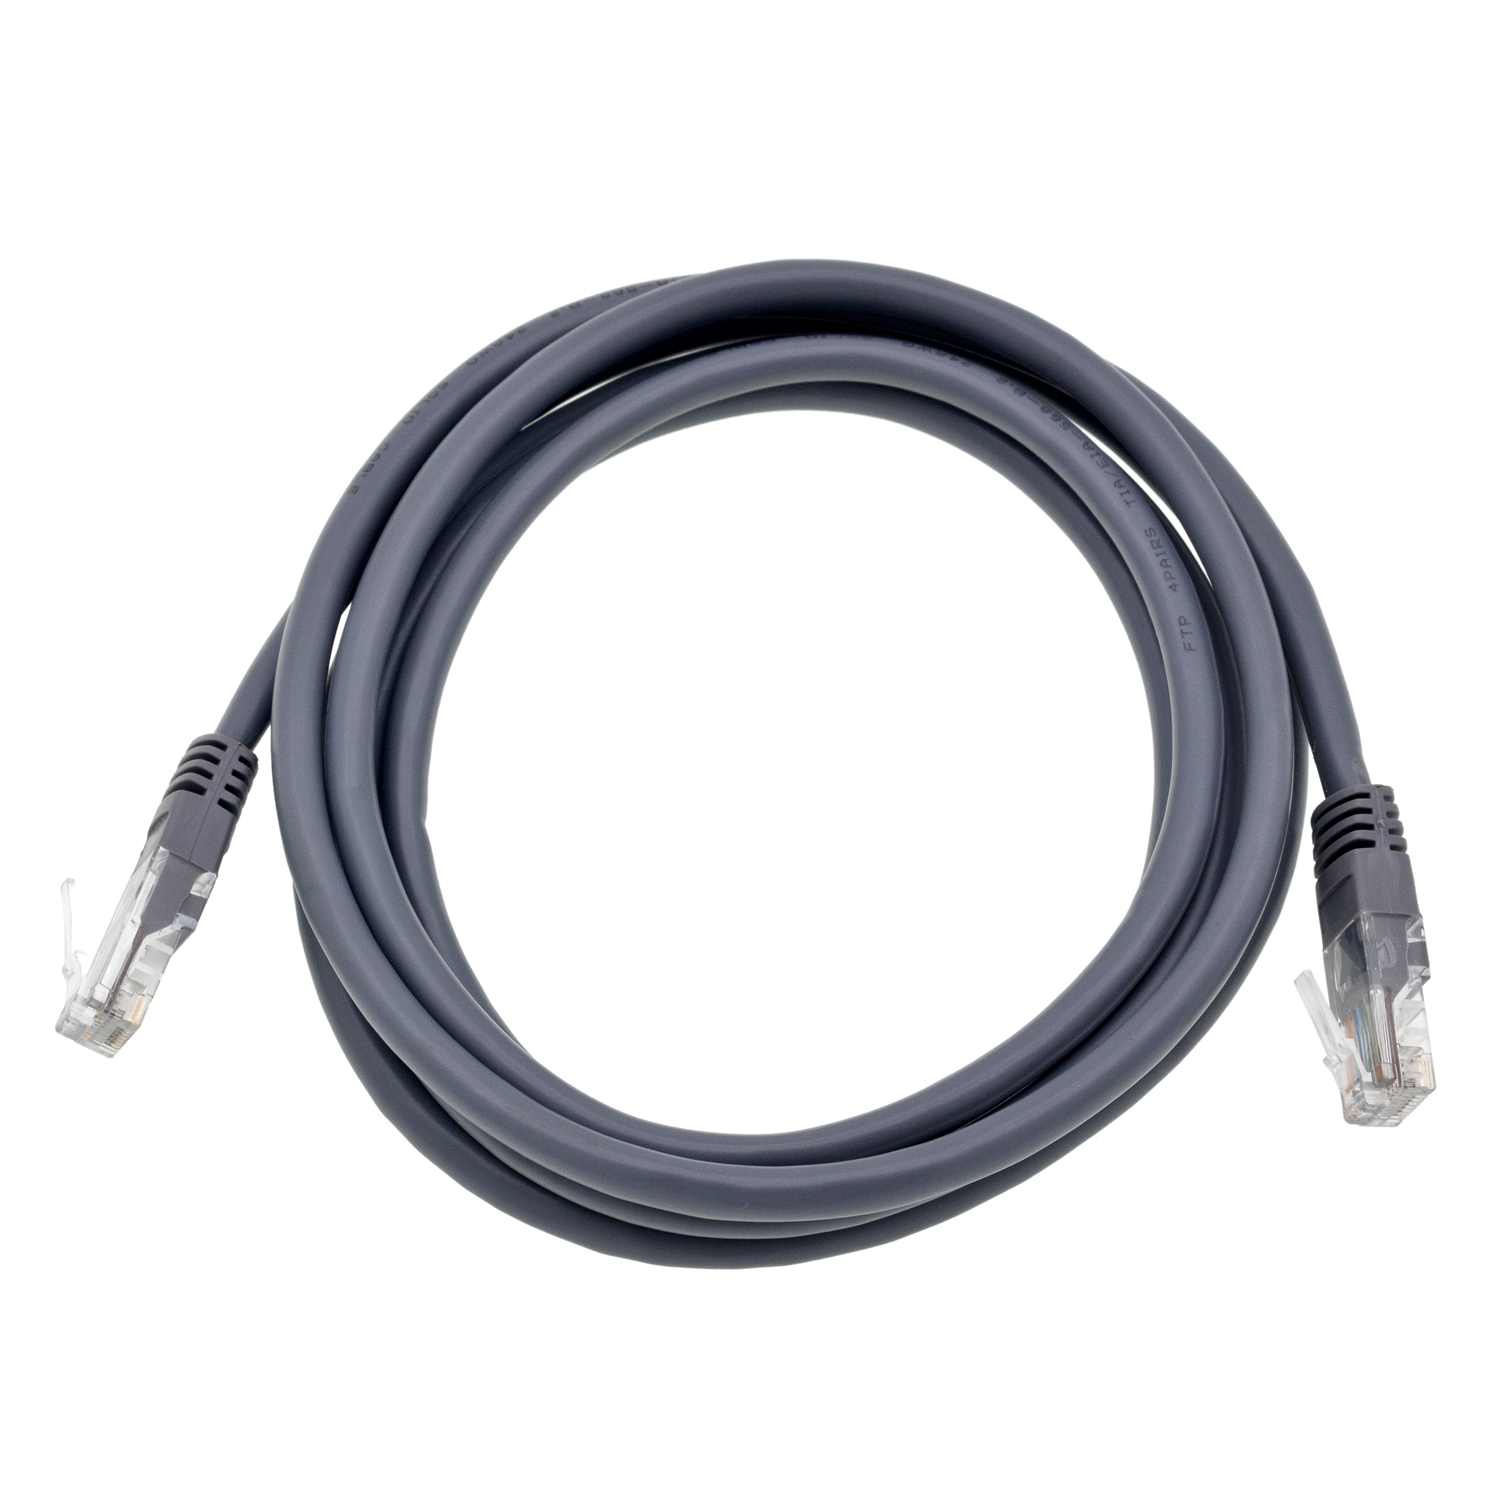 CAT6 Ethernet Cable FTP 8P8C Shielded Cable for Networking 